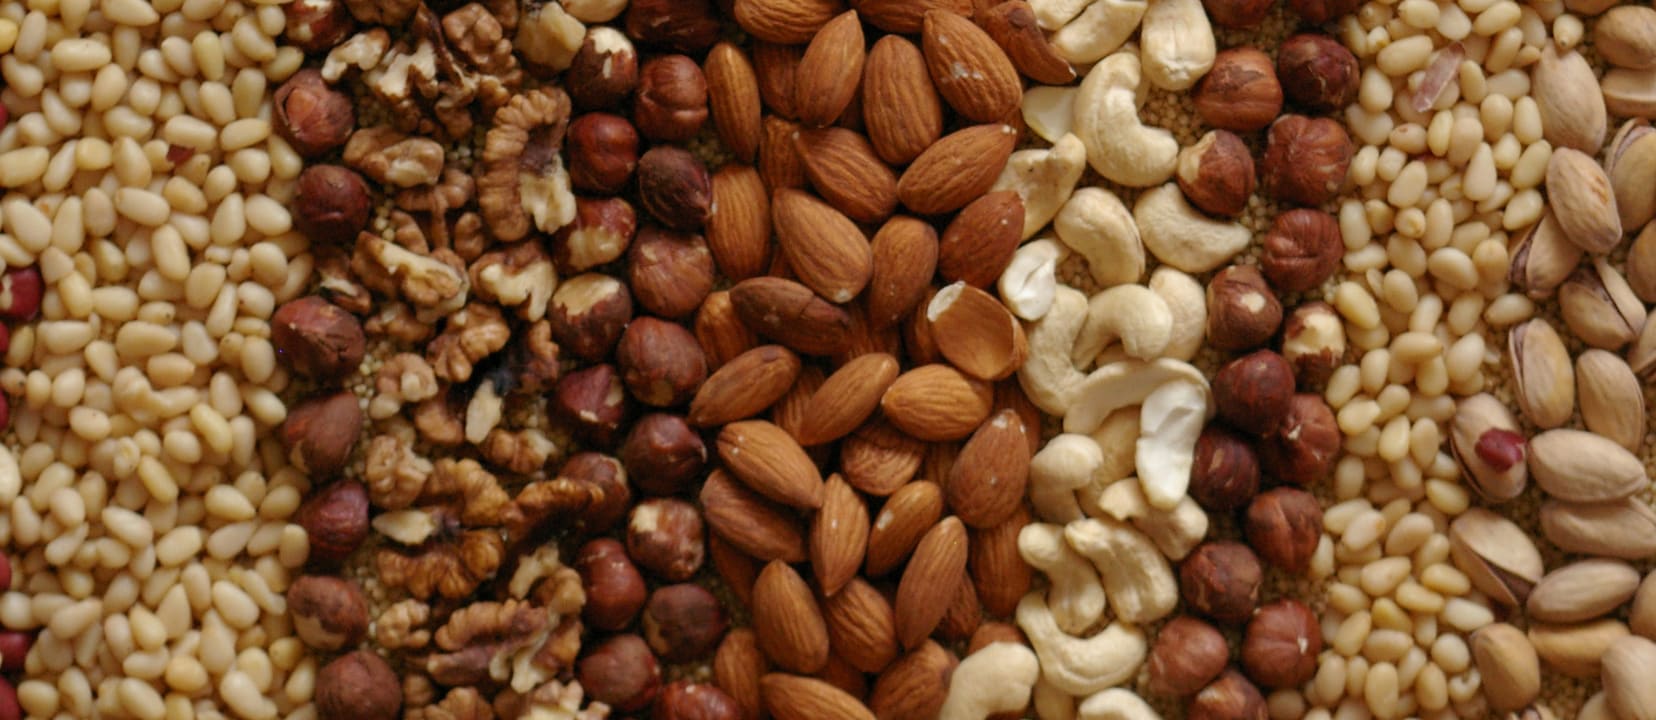 Which Nut Fights Cancer Better?